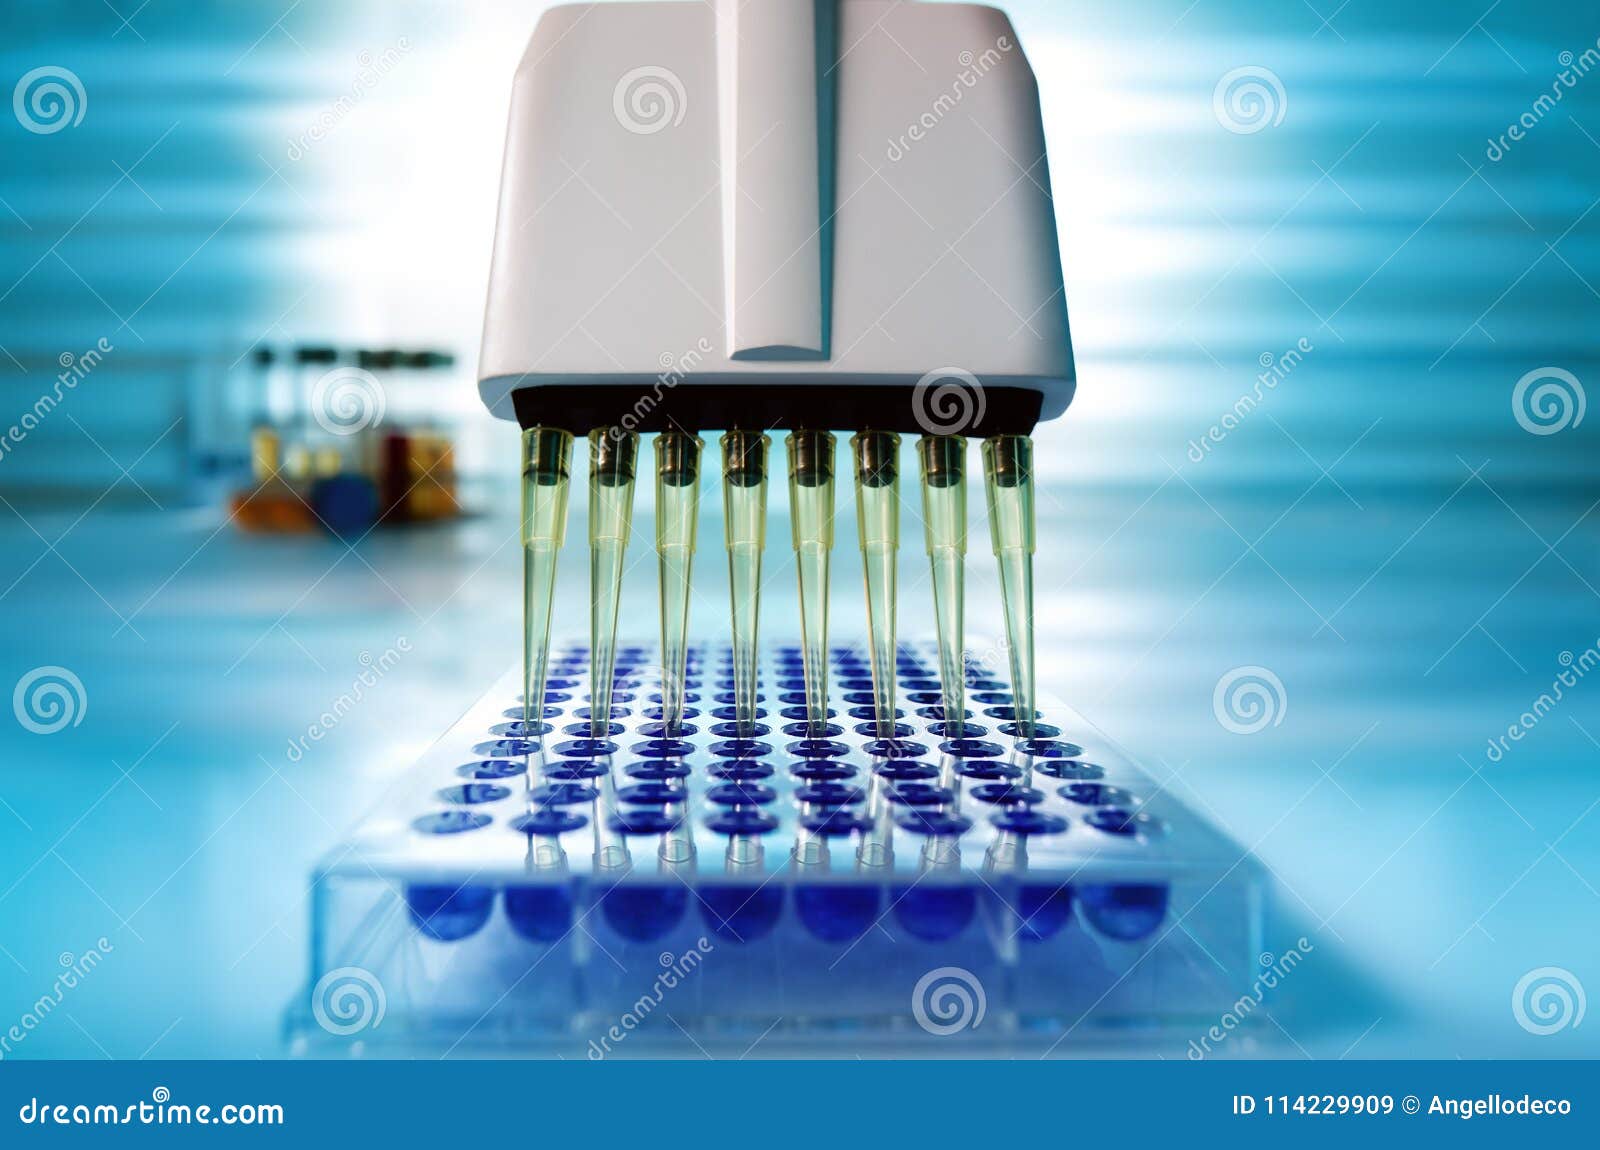 multi channel pipette loading biological samples in microplate f